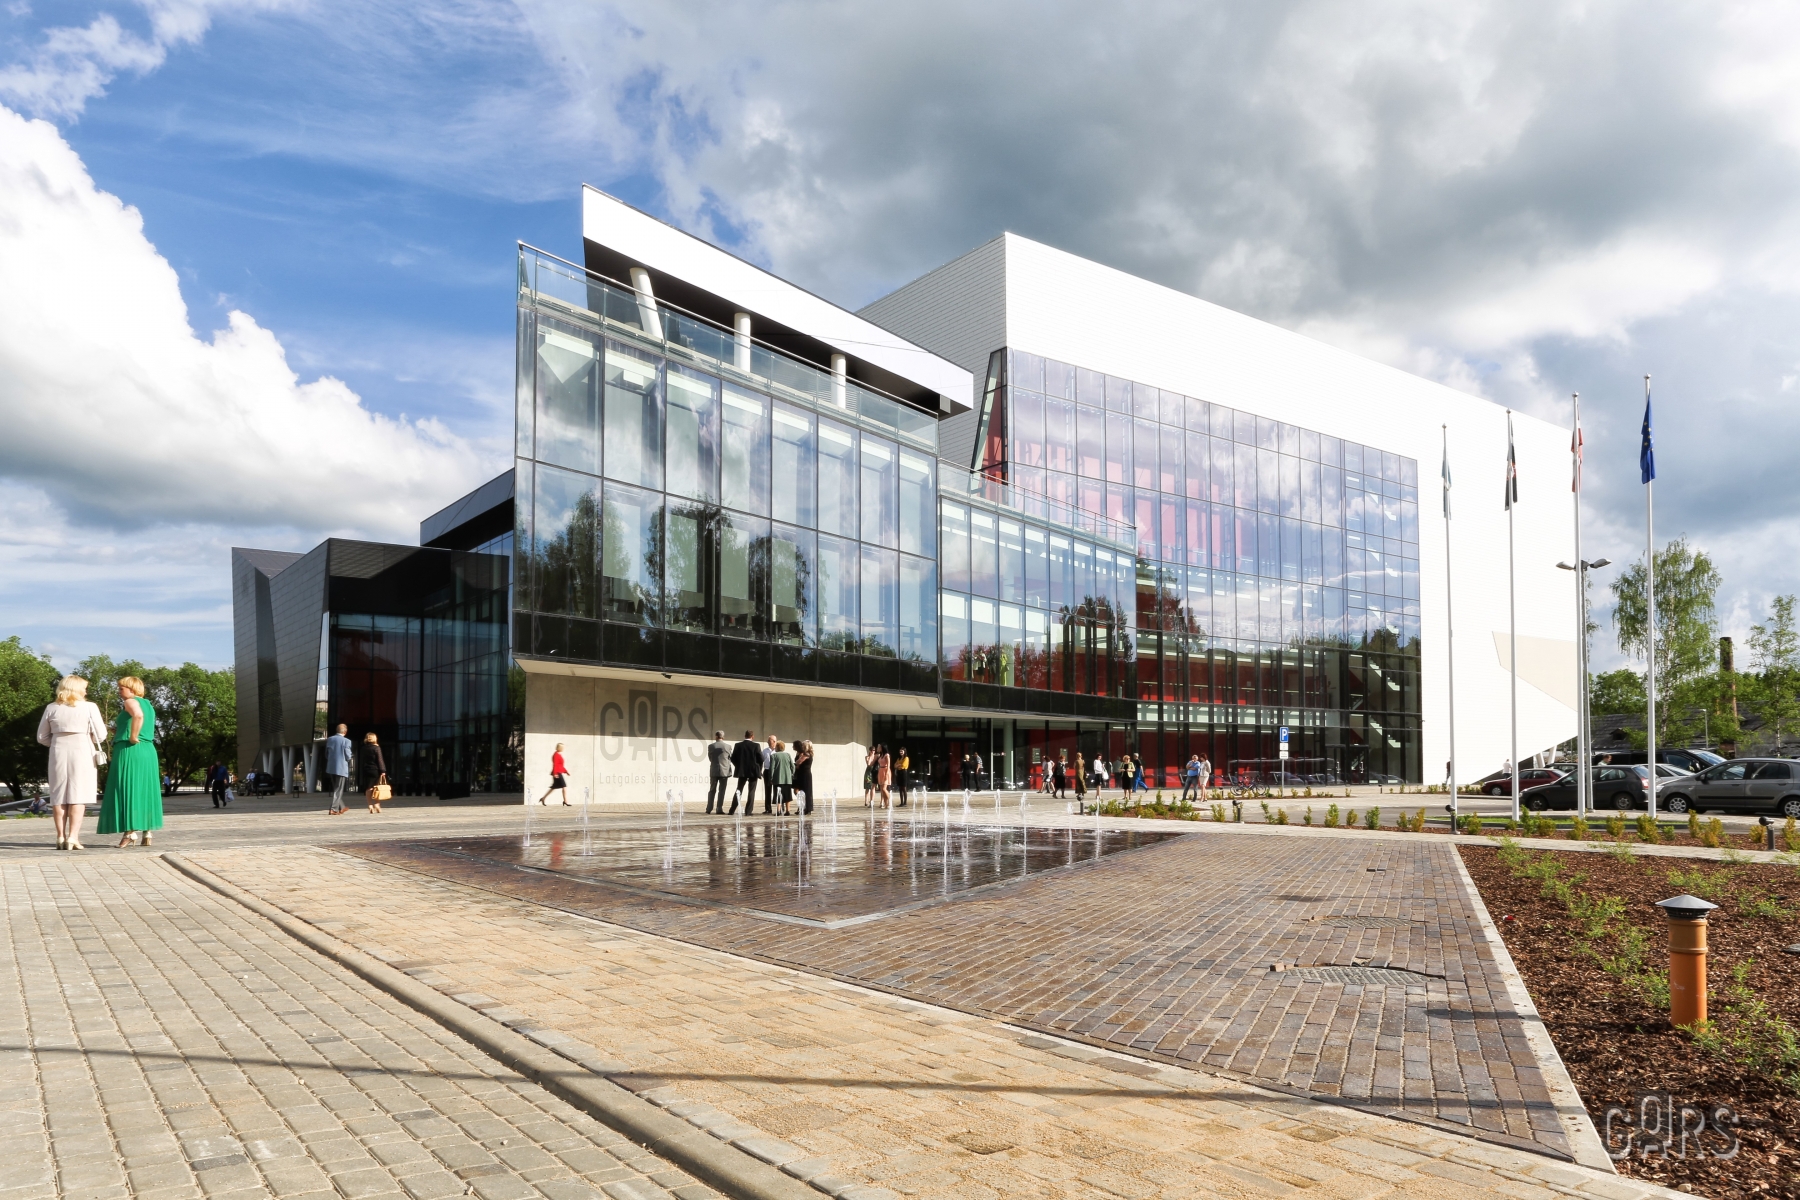 Newly built concert halls – new places for events in Latvia